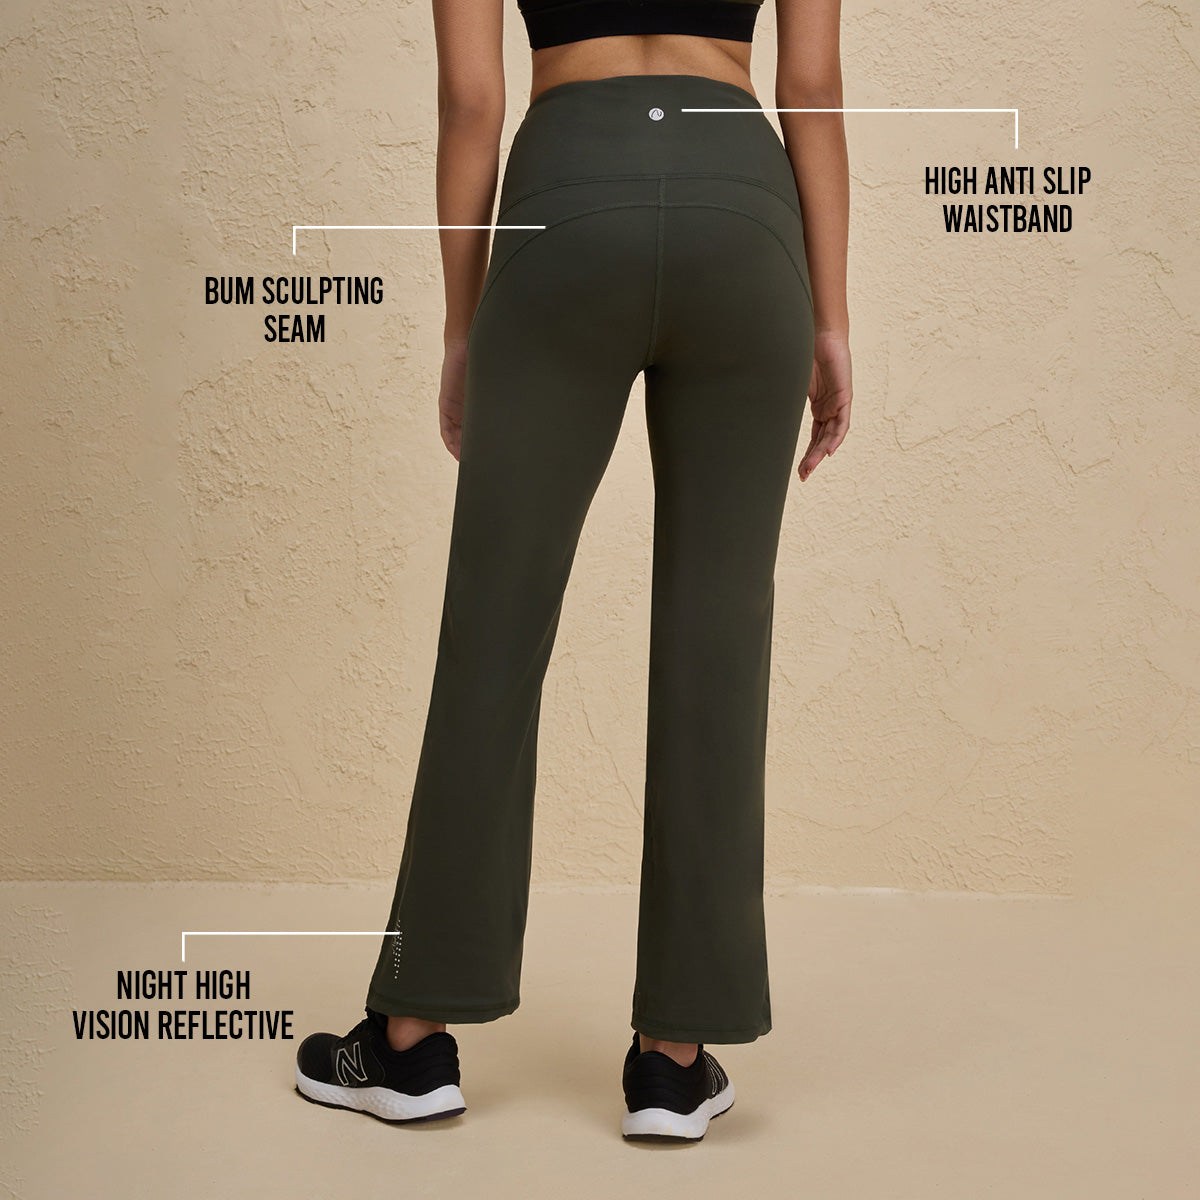 Nykd By Nykaa Cloud Soft Super Comfy & Flattering Flare Pants with Pockets-NYK252-Olive